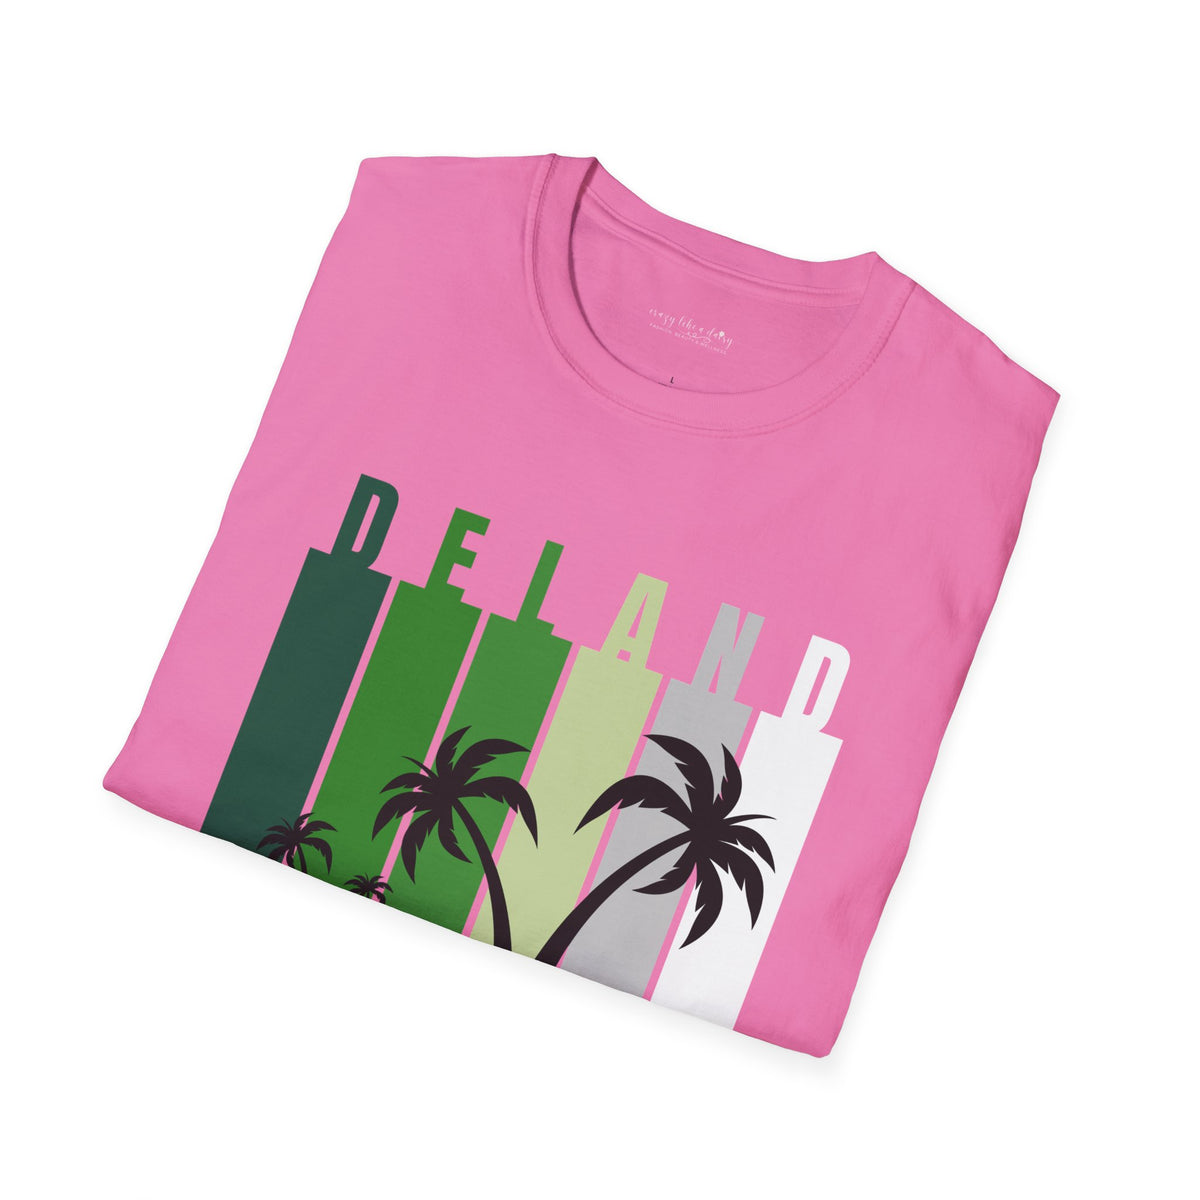 Custom COLLEGE TOWN Palm Trees - Softstyle T-Shirt